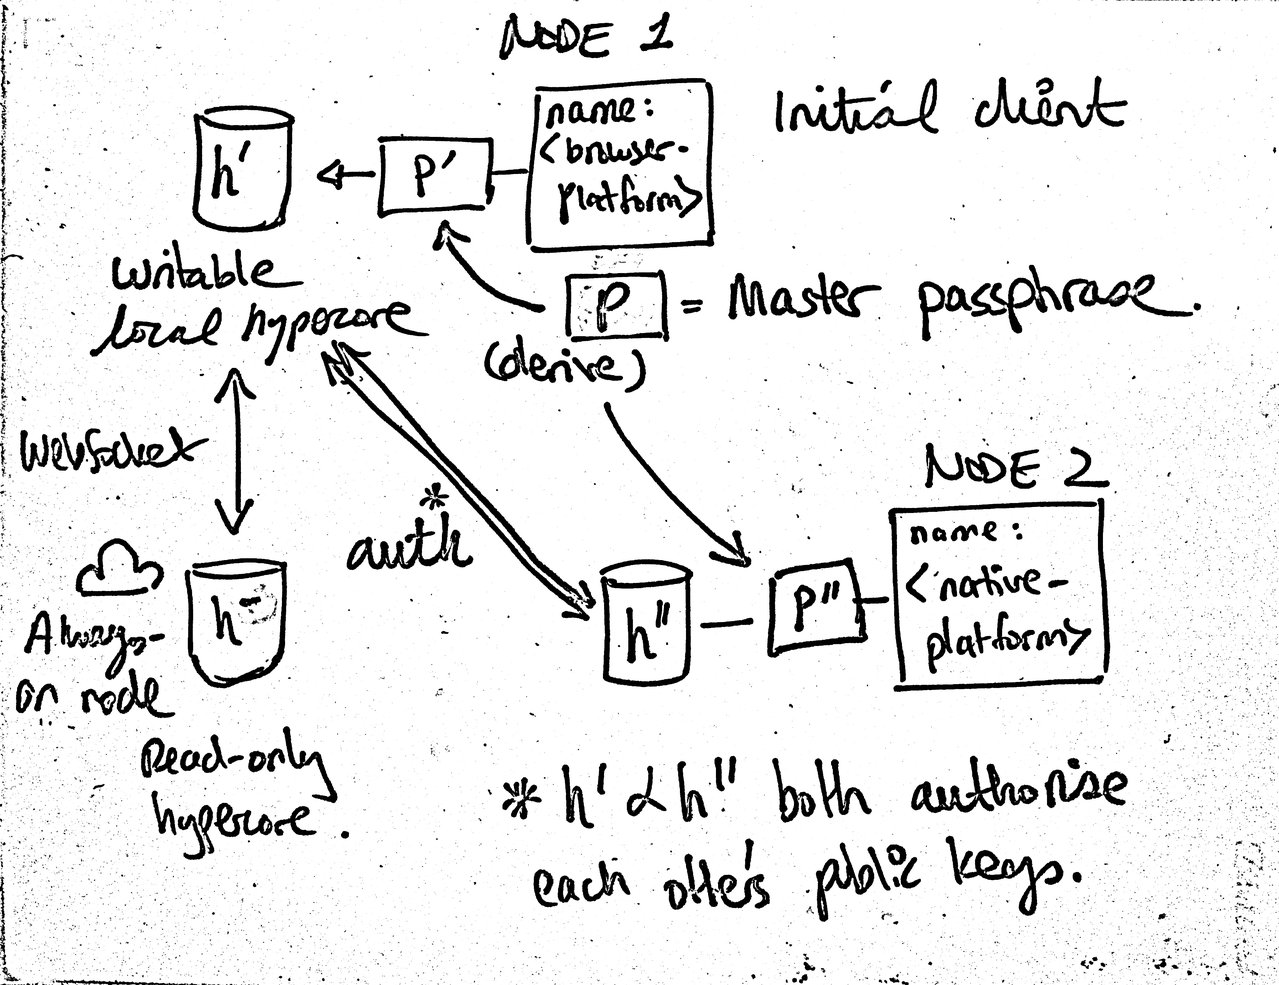 Whiteboard sketch showing two regular nodes and the always-on node. The keys for the regular nodes are derived from the master key.